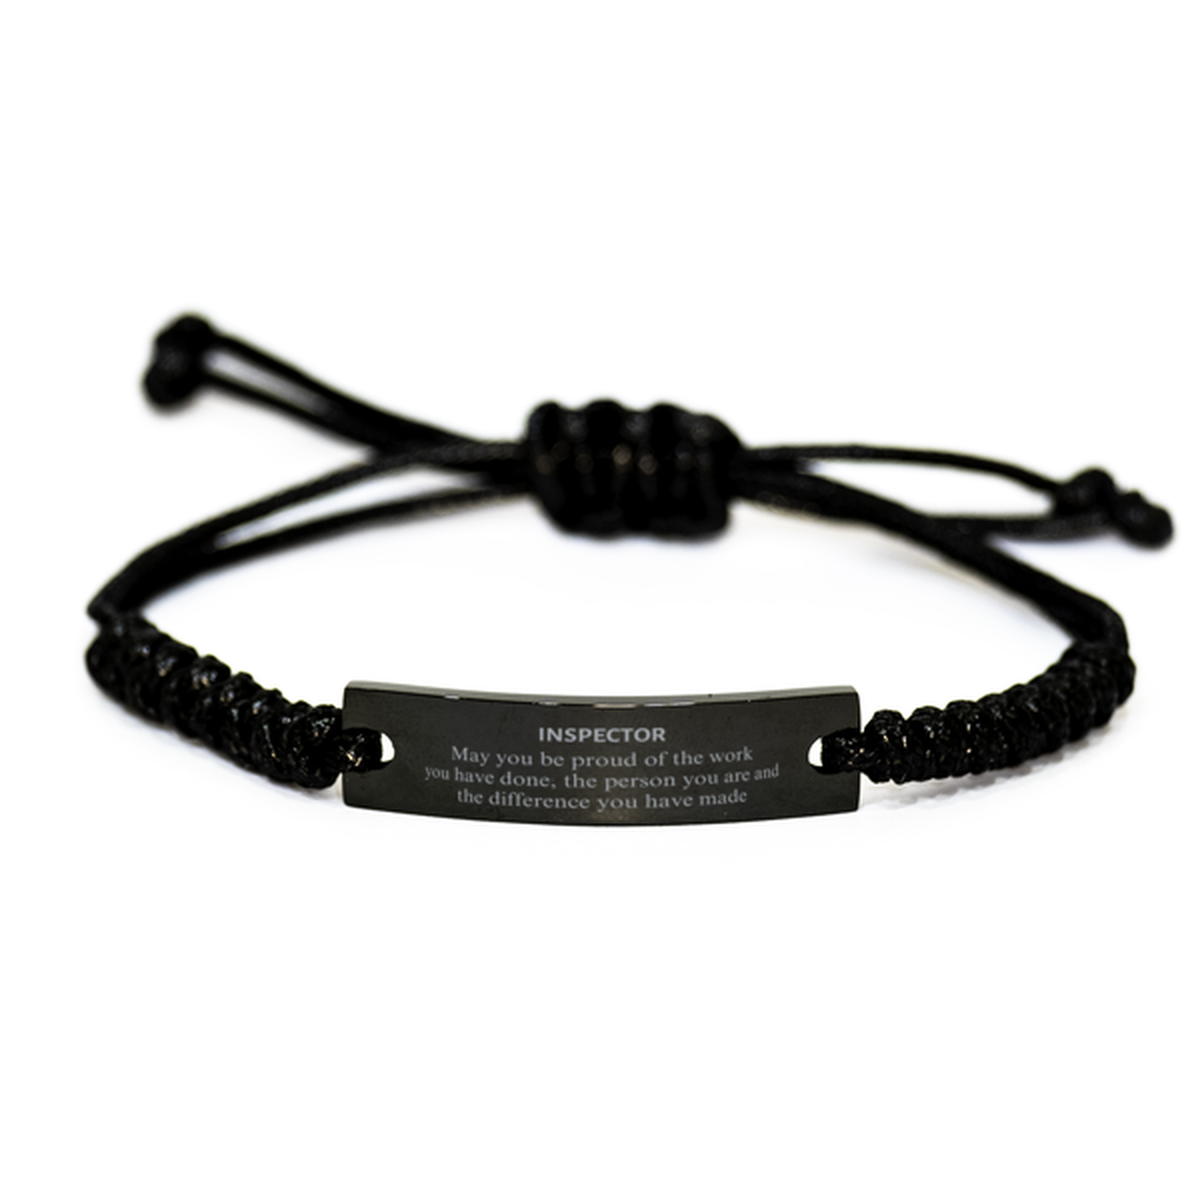 Inspector May you be proud of the work you have done, Retirement Inspector Black Rope Bracelet for Colleague Appreciation Gifts Amazing for Inspector